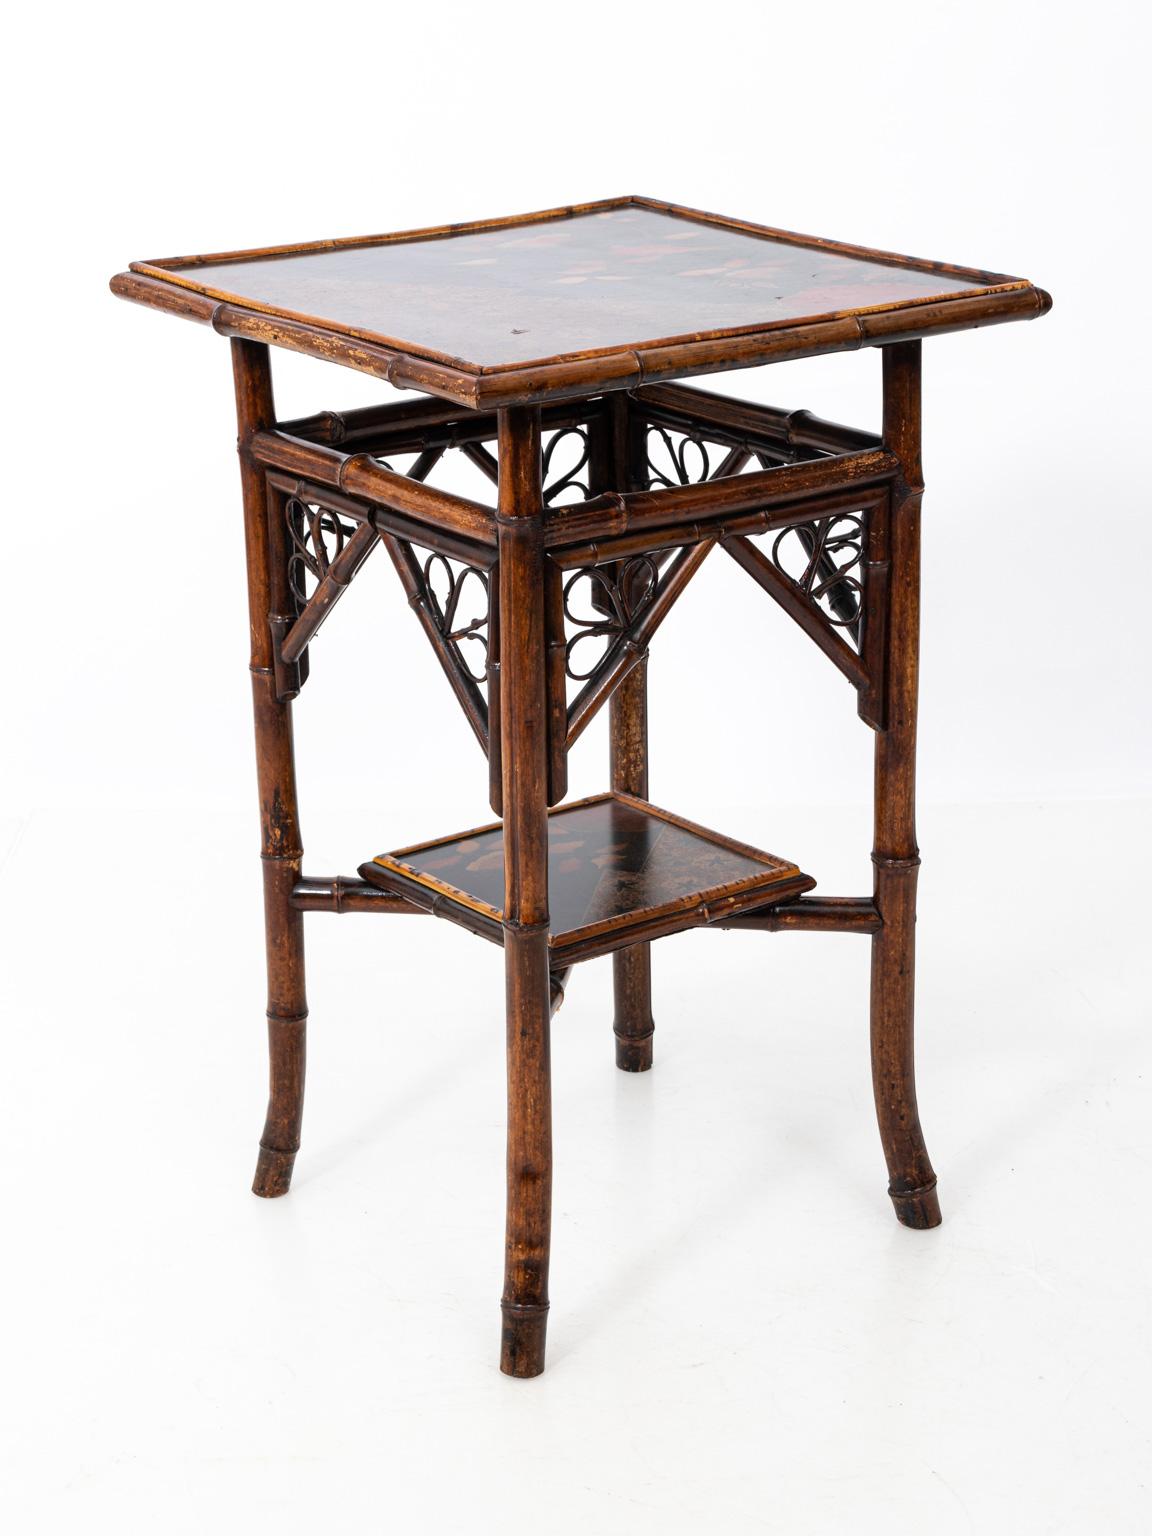 Victorian Aesthetic Movement style two-tier side table in bamboo, circa early 20th century. The painted tabletop is highlighted by Japonesque flowers and geometric shapes. Please note of wear consistent with age including wear to the bamboo frame.